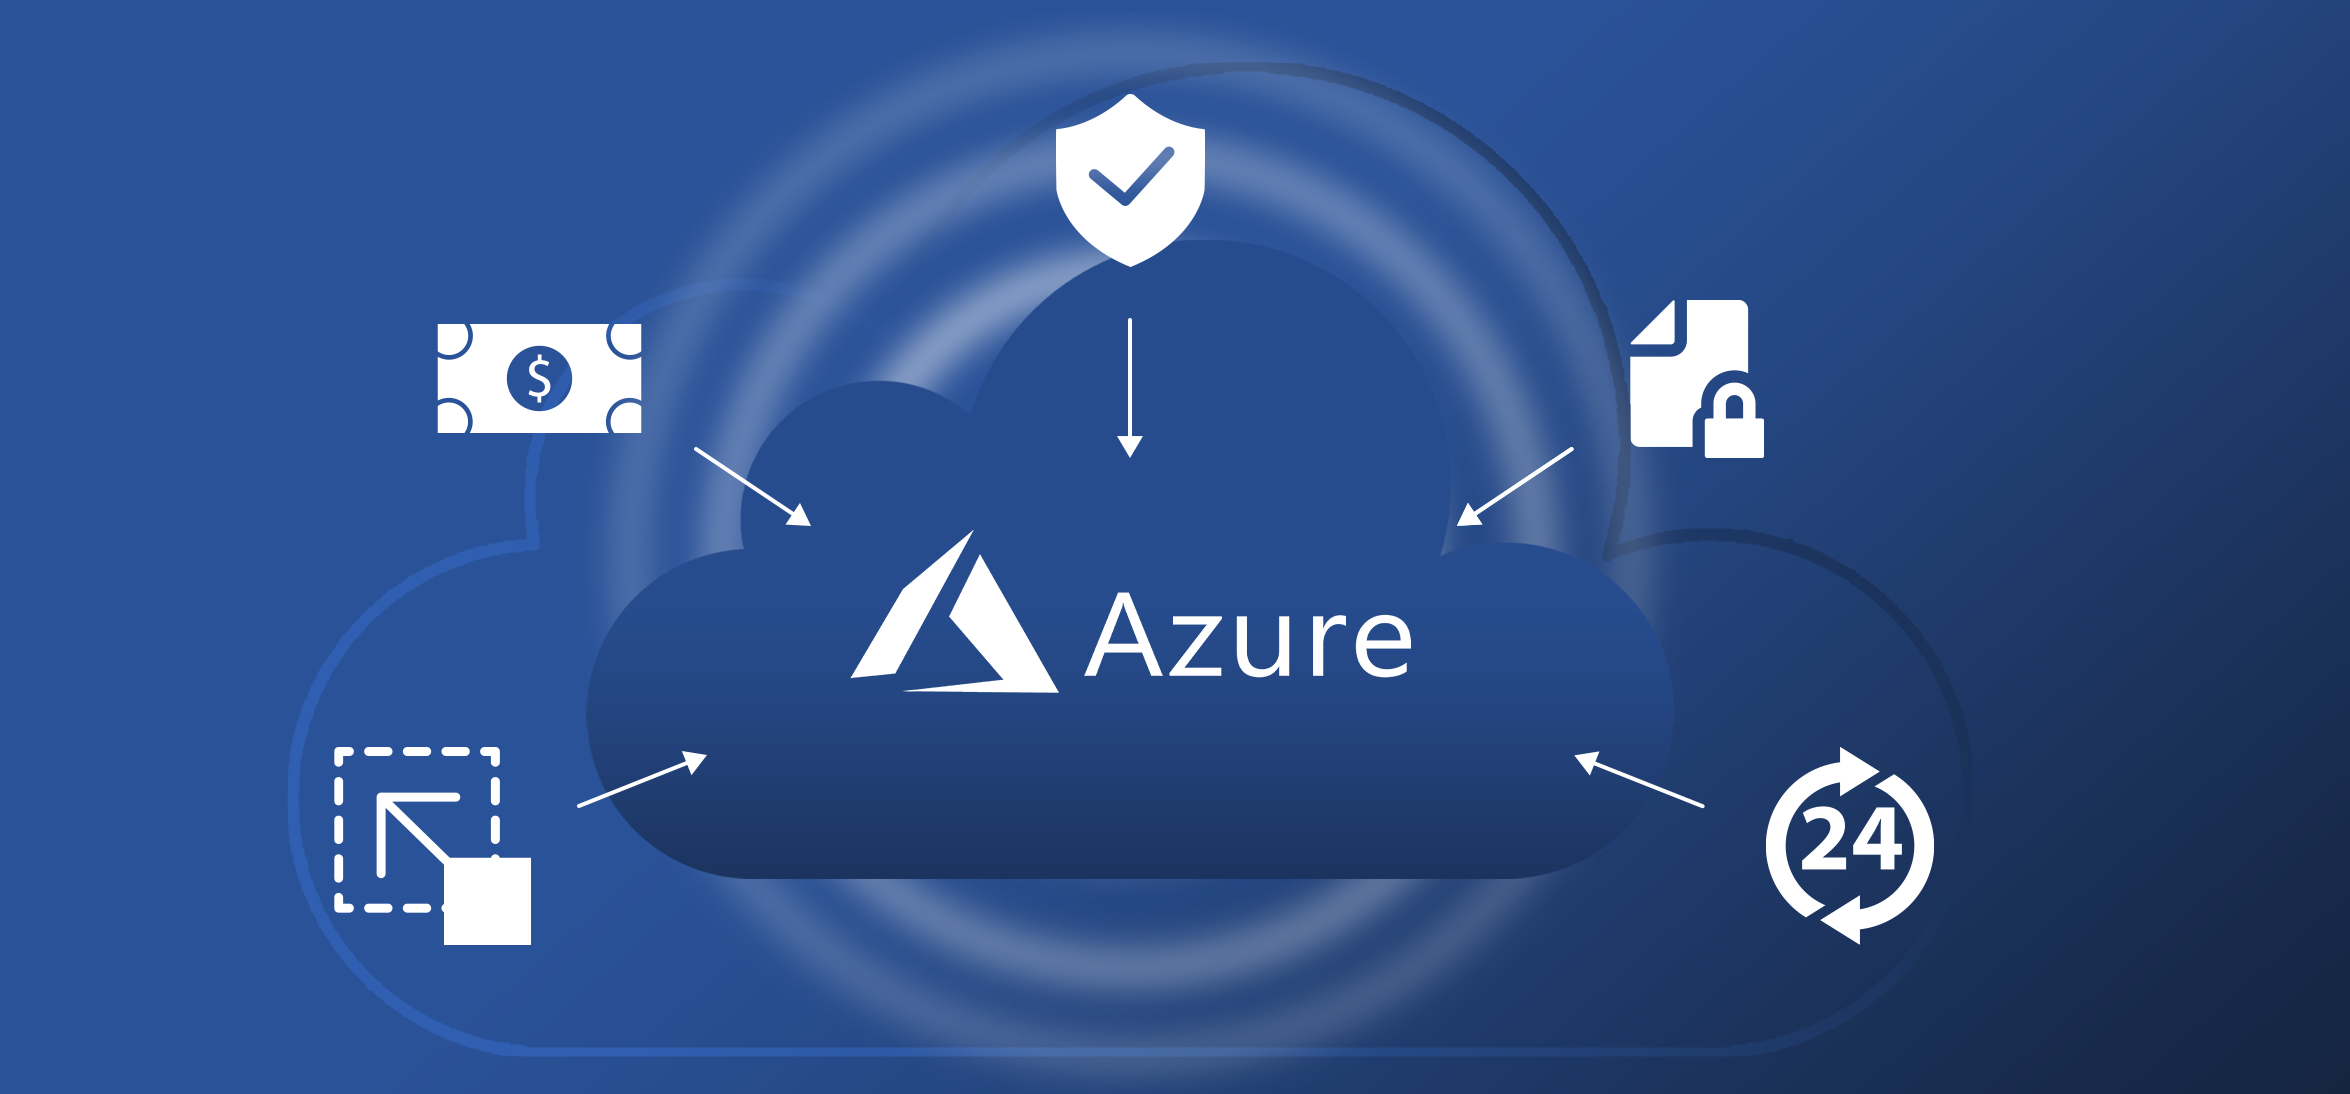 Microsoft Azure Administration and Consulting Services in La Jolla CA, 92093